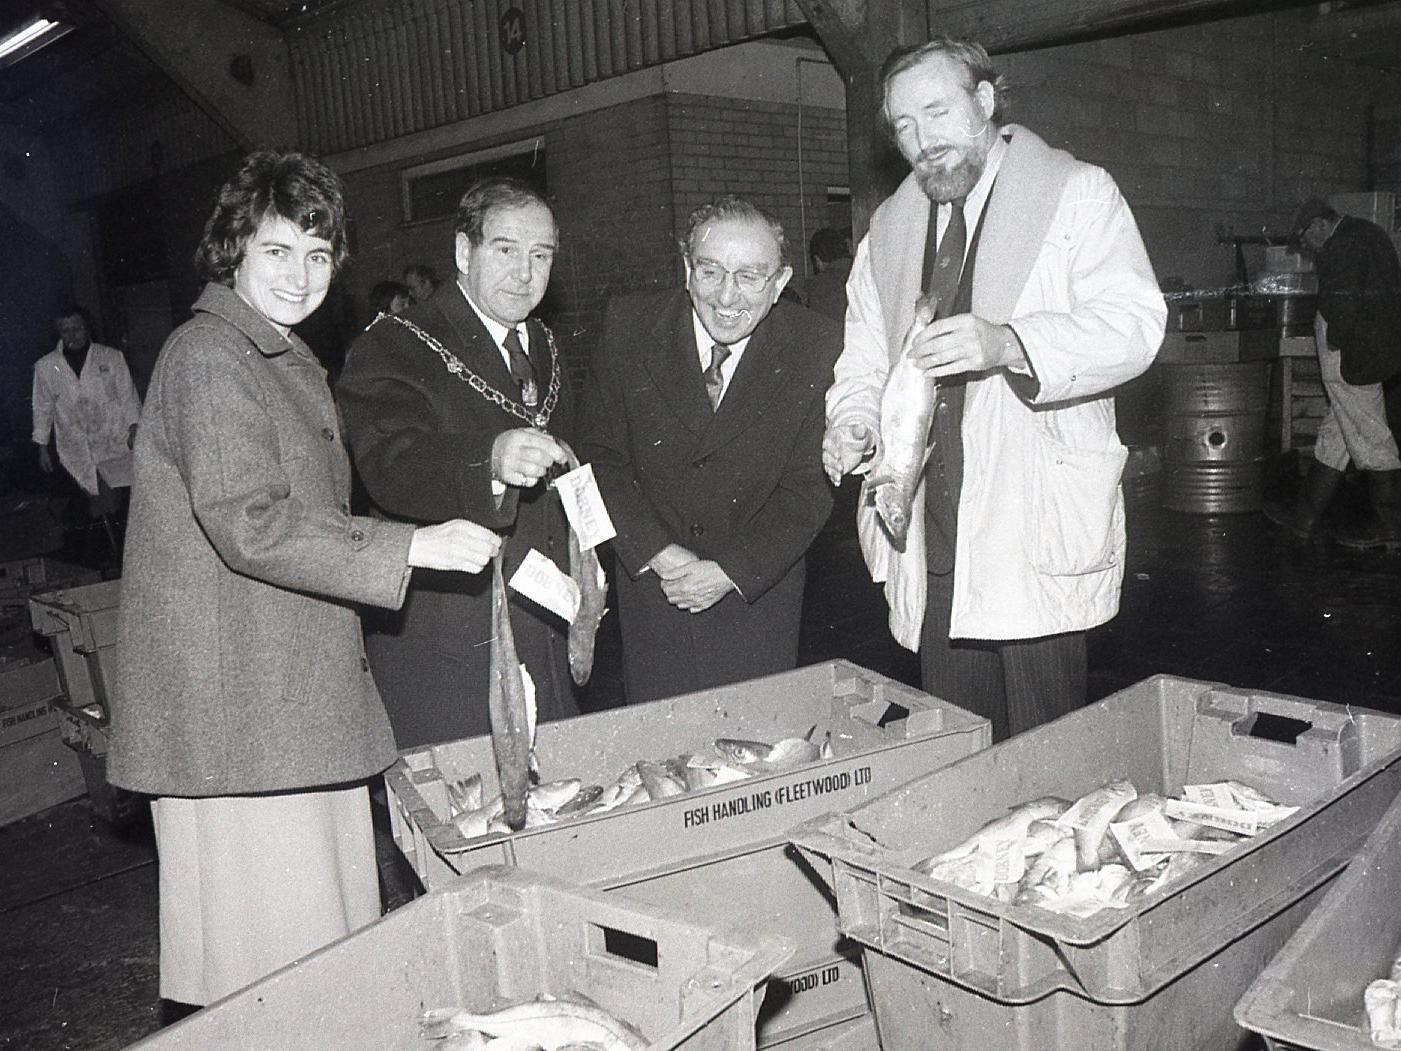 Louise Ellman, chairman of Lancashire County Council; Charles Stabbing, Mayor of Wyre; Jim Mason, chairman of Lancashire Enterprises and Owen Oyston, director of Lancashire Enterprises, inspect the first catch by a British vessel - Navena, which returned to Fleetwood dock after an absense of six months